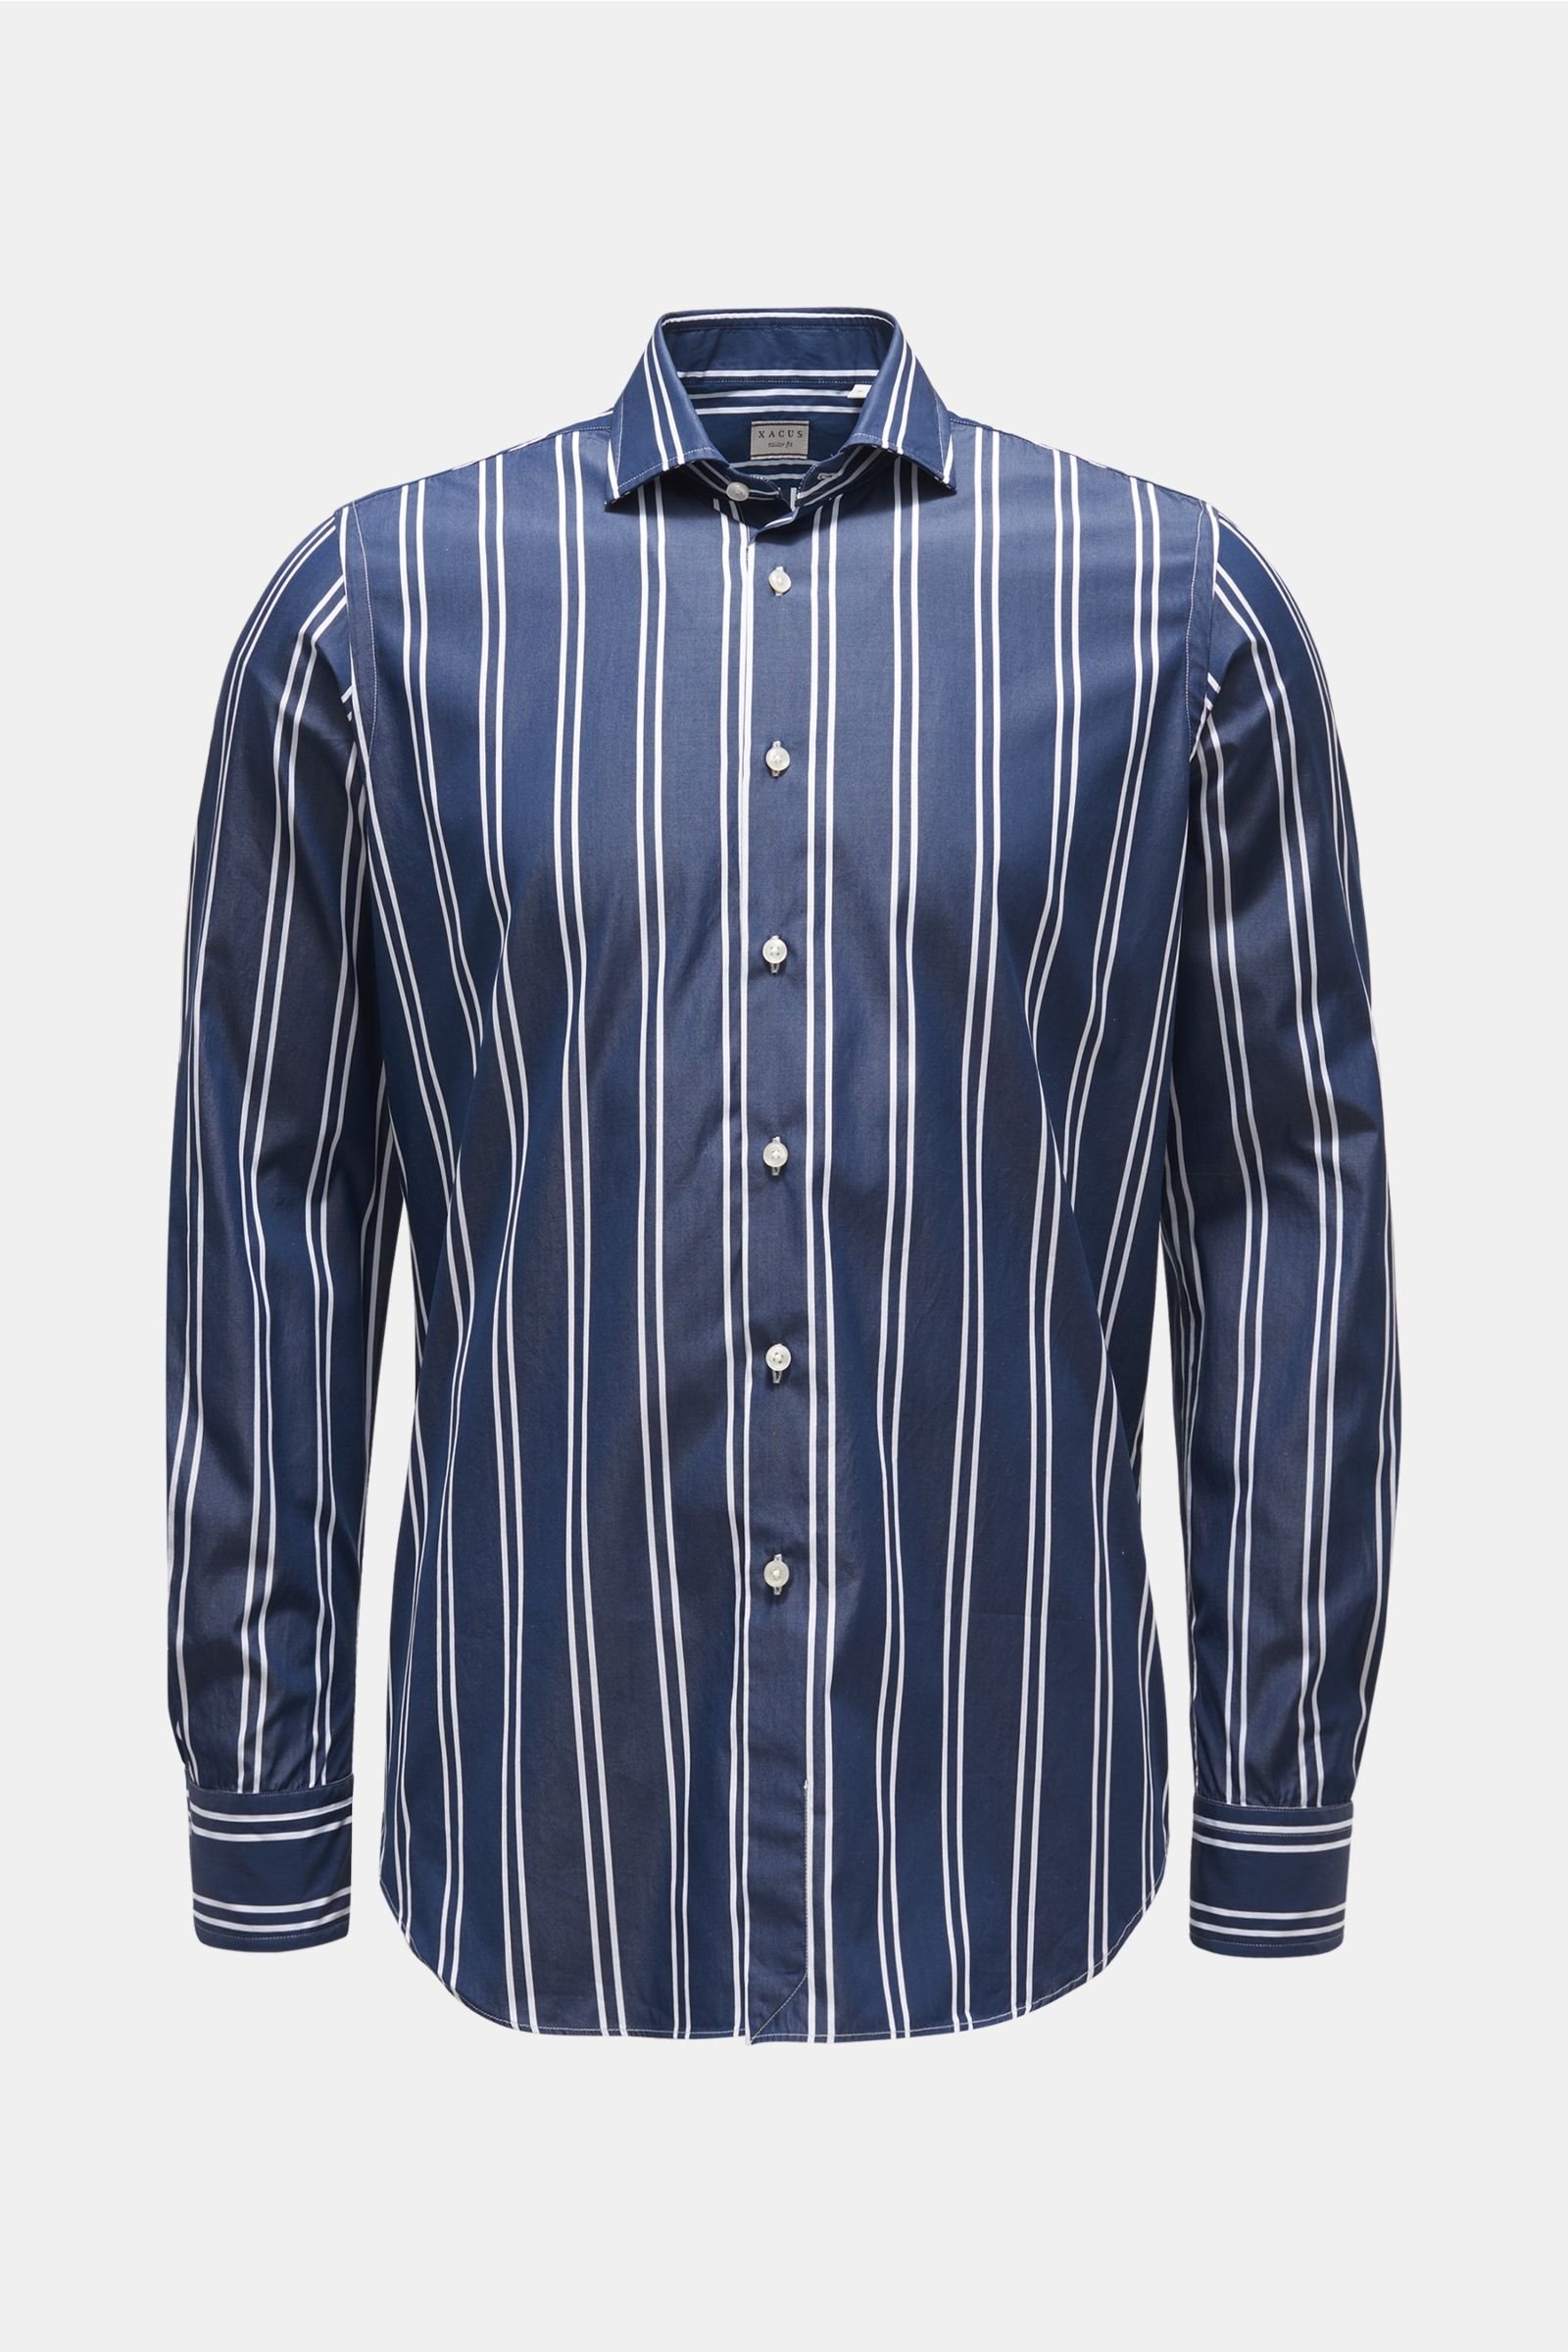 Casual shirt 'Tailor Fit' slim collar navy/white striped